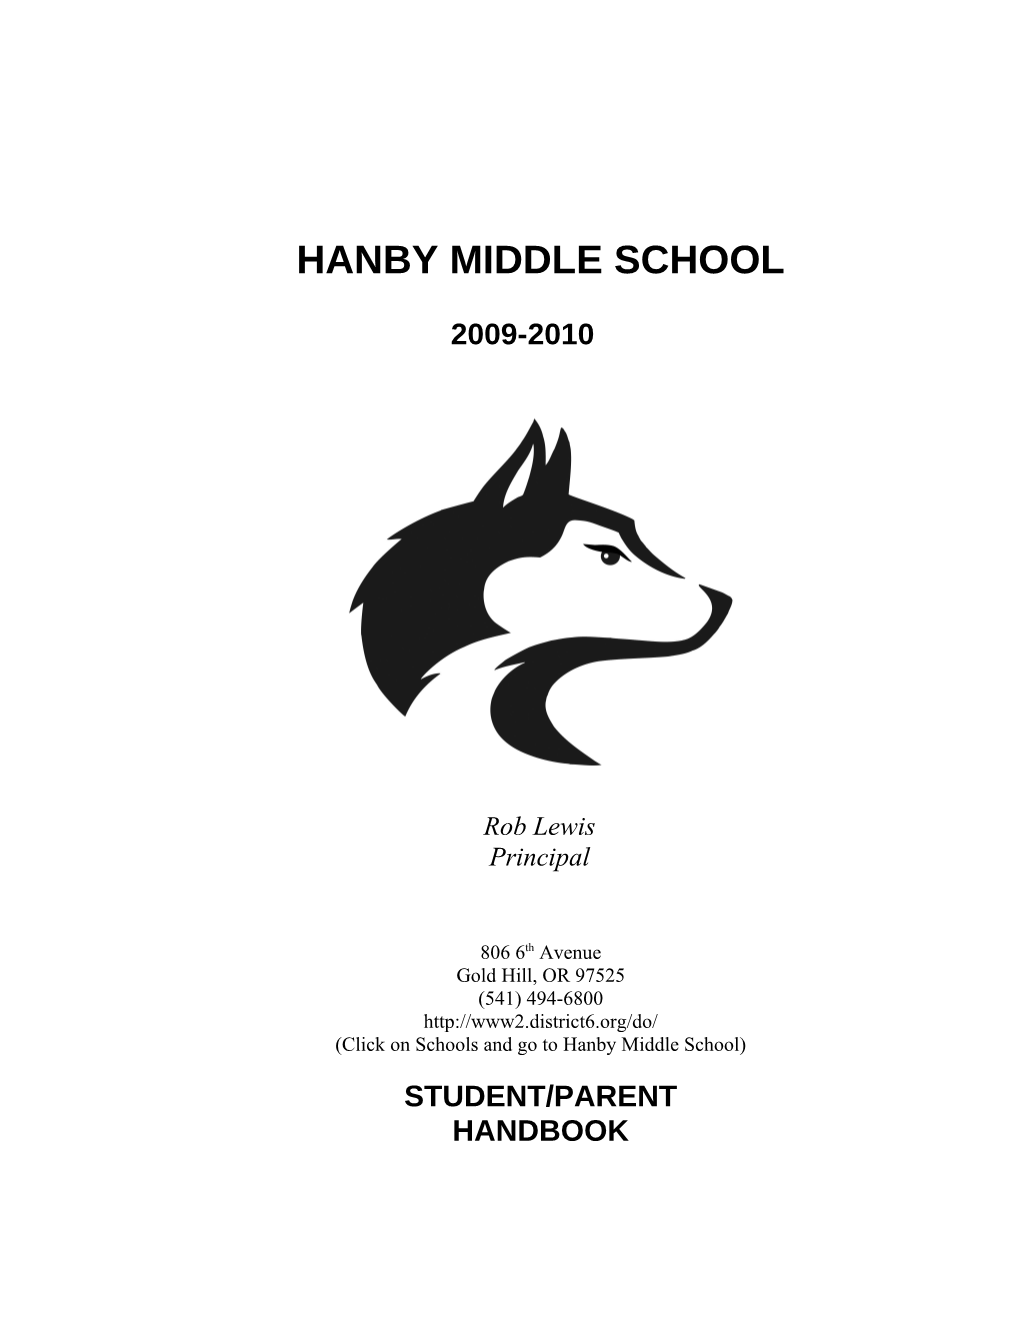 Click on Schools and Go to Hanby Middle School